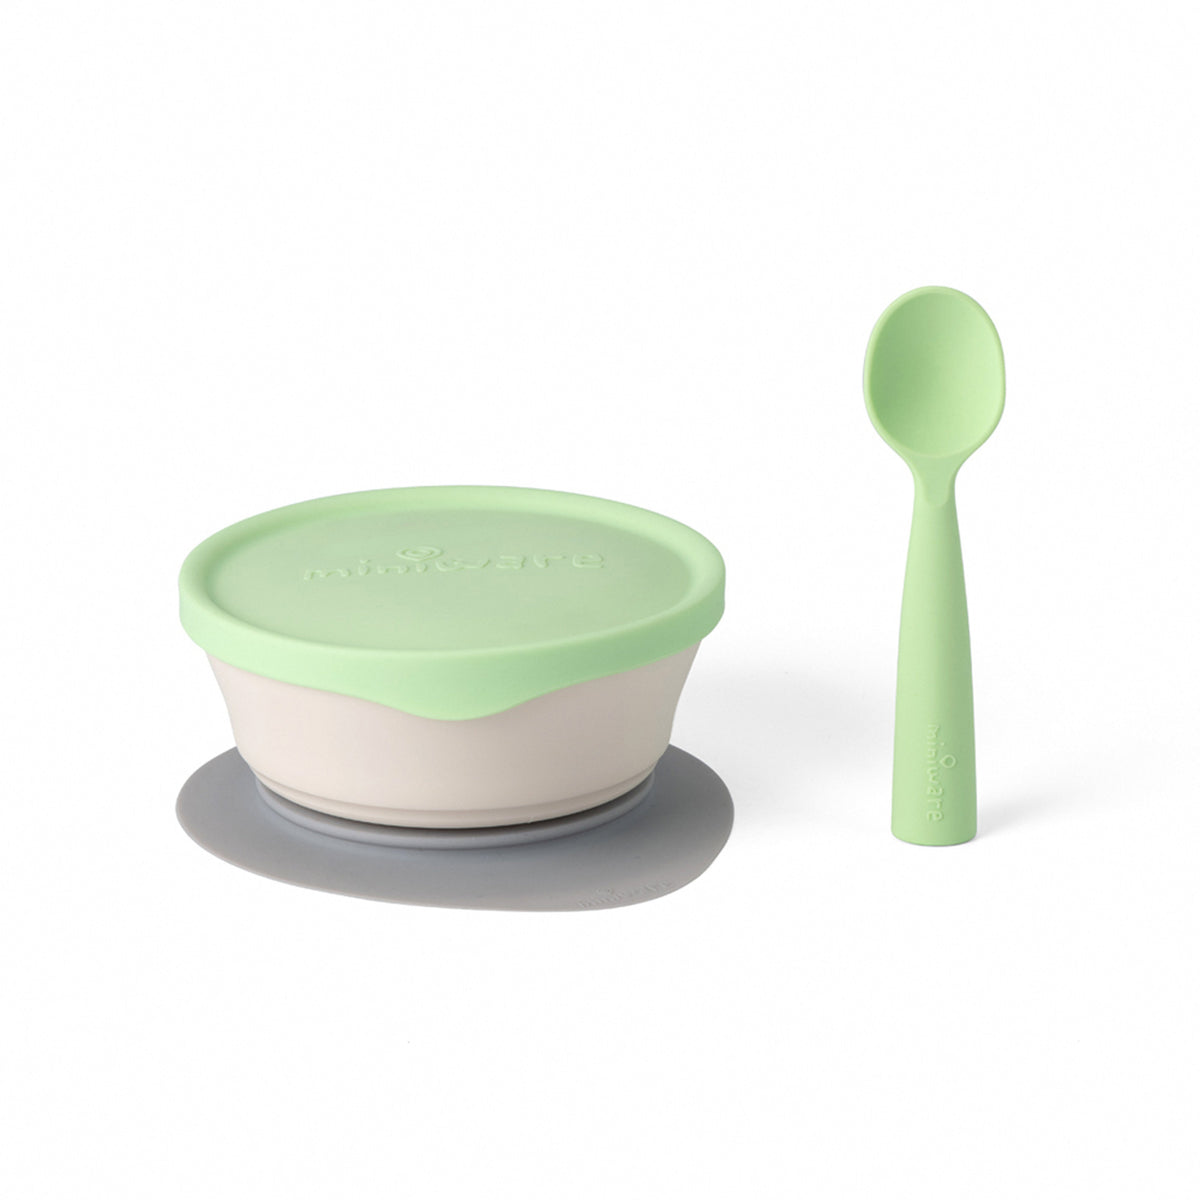 miniware-first-bite-set-pla-cereal-suction-bowl-vanilla-+-silicone-spoon-and-cover-in-cotton-keylime- (2)